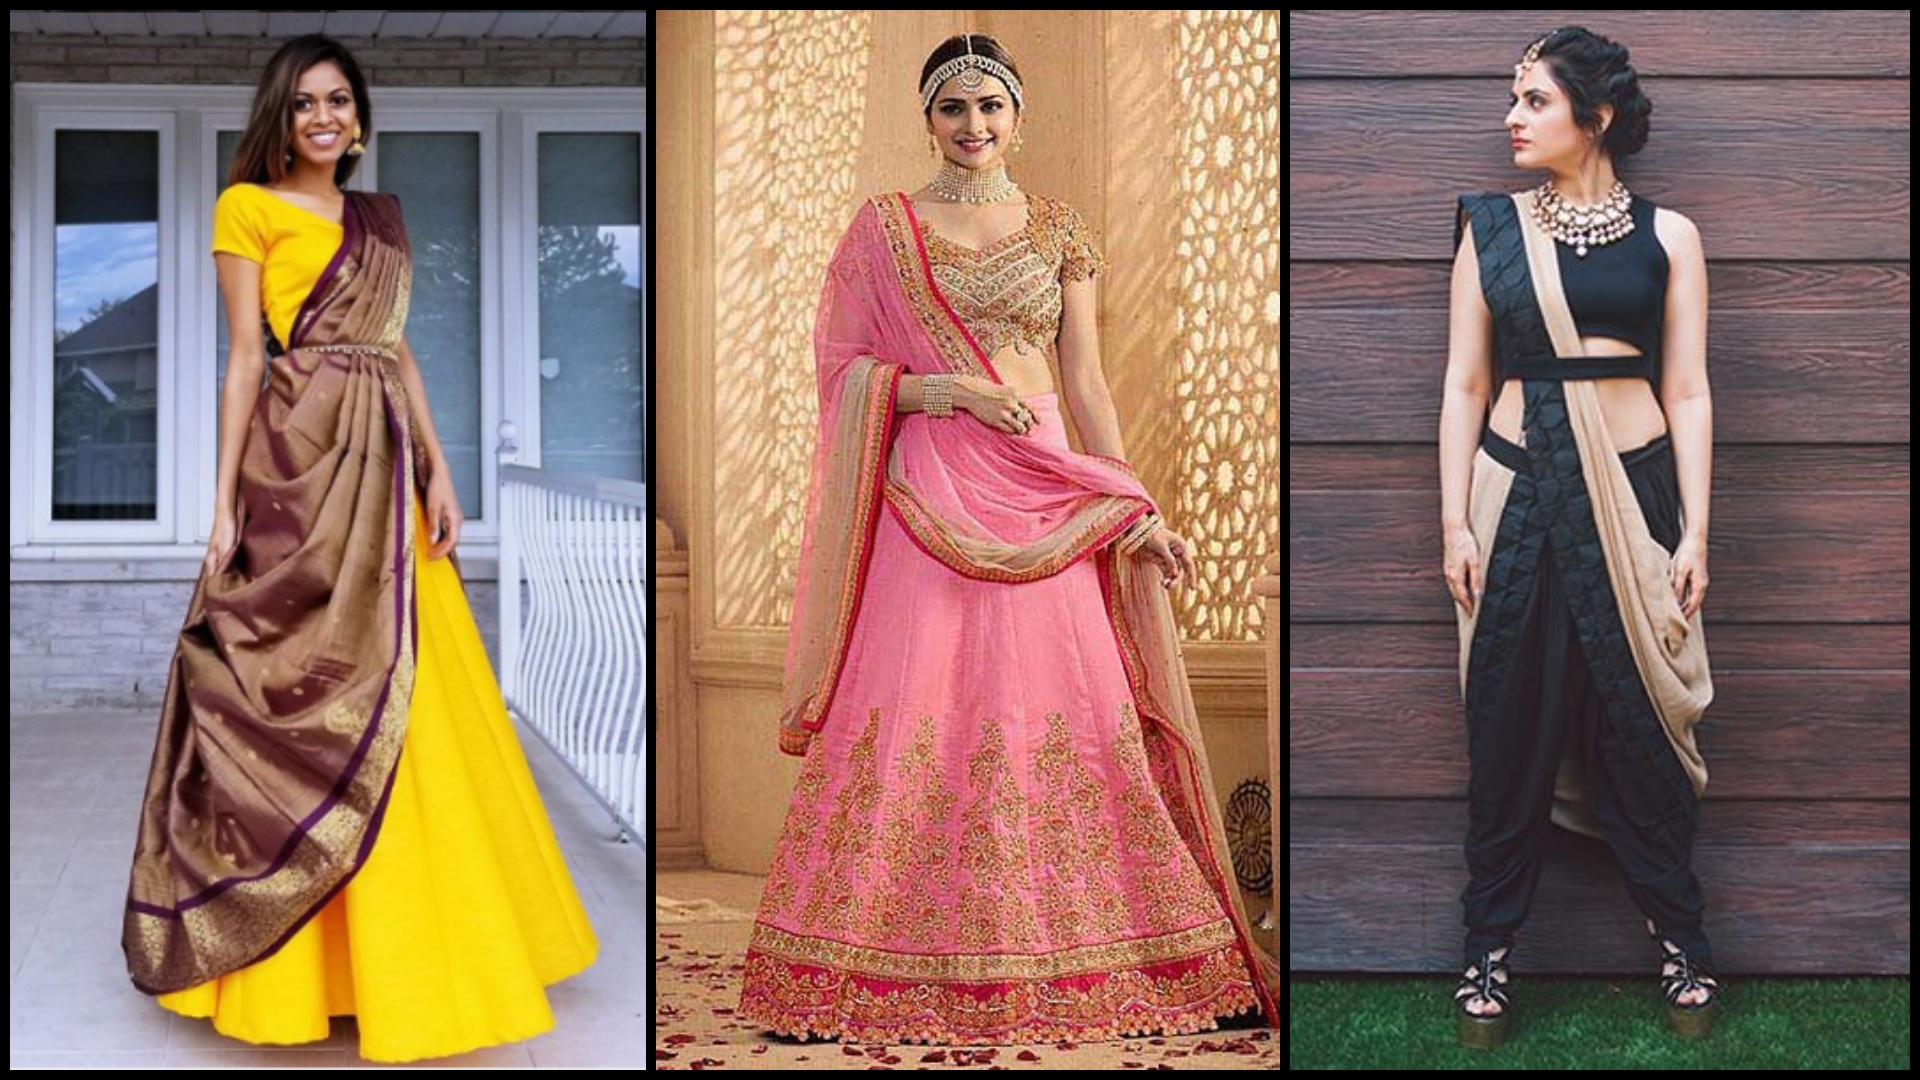 Style Your Dupatta in 6 Different Ways - One Dupatta Many Looks